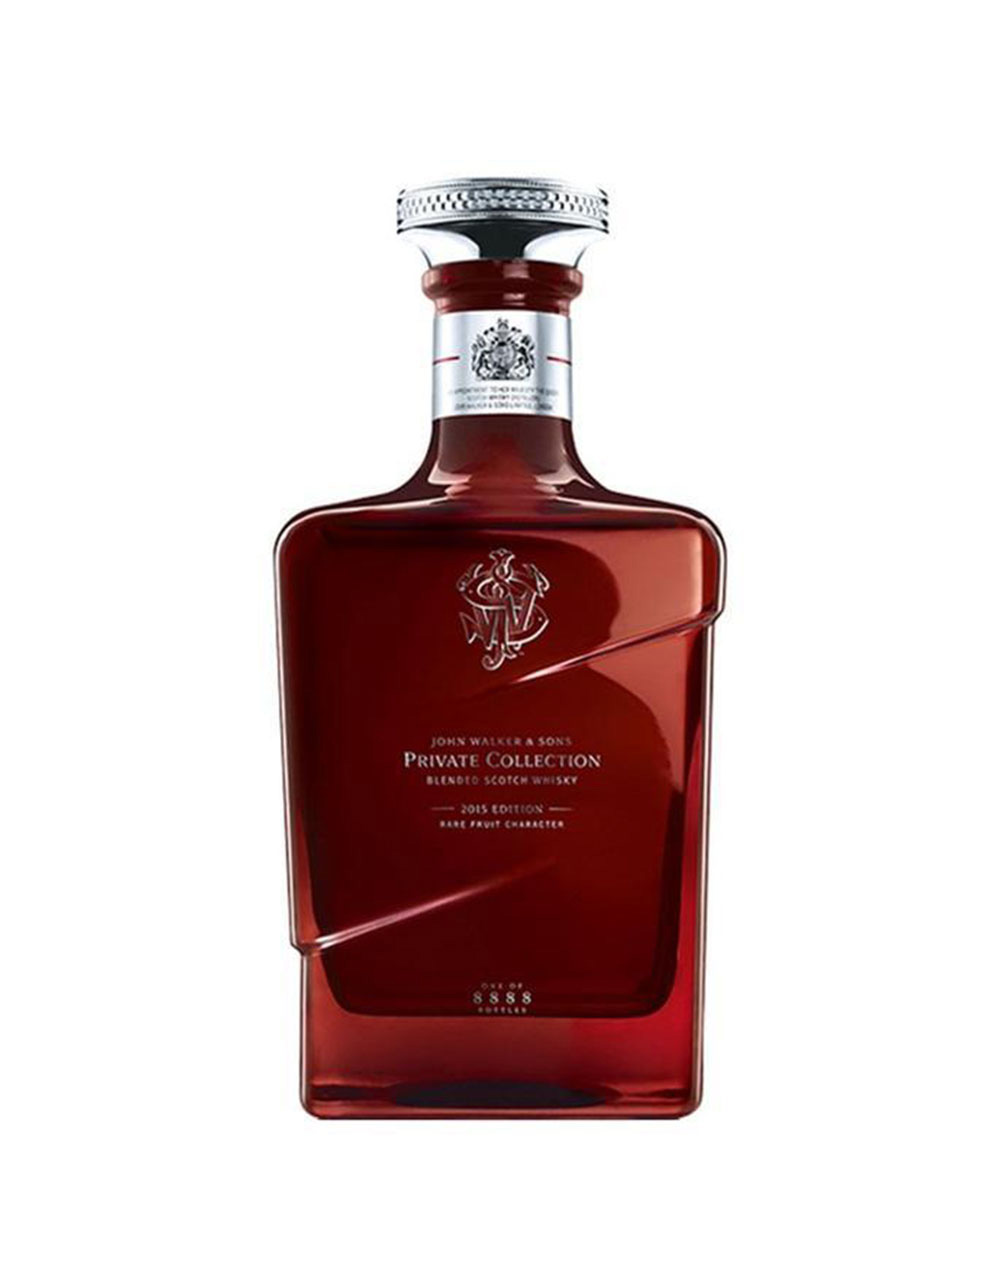 John Walker & Sons Private Collection 2015 Edition Blended Scotch Whisky